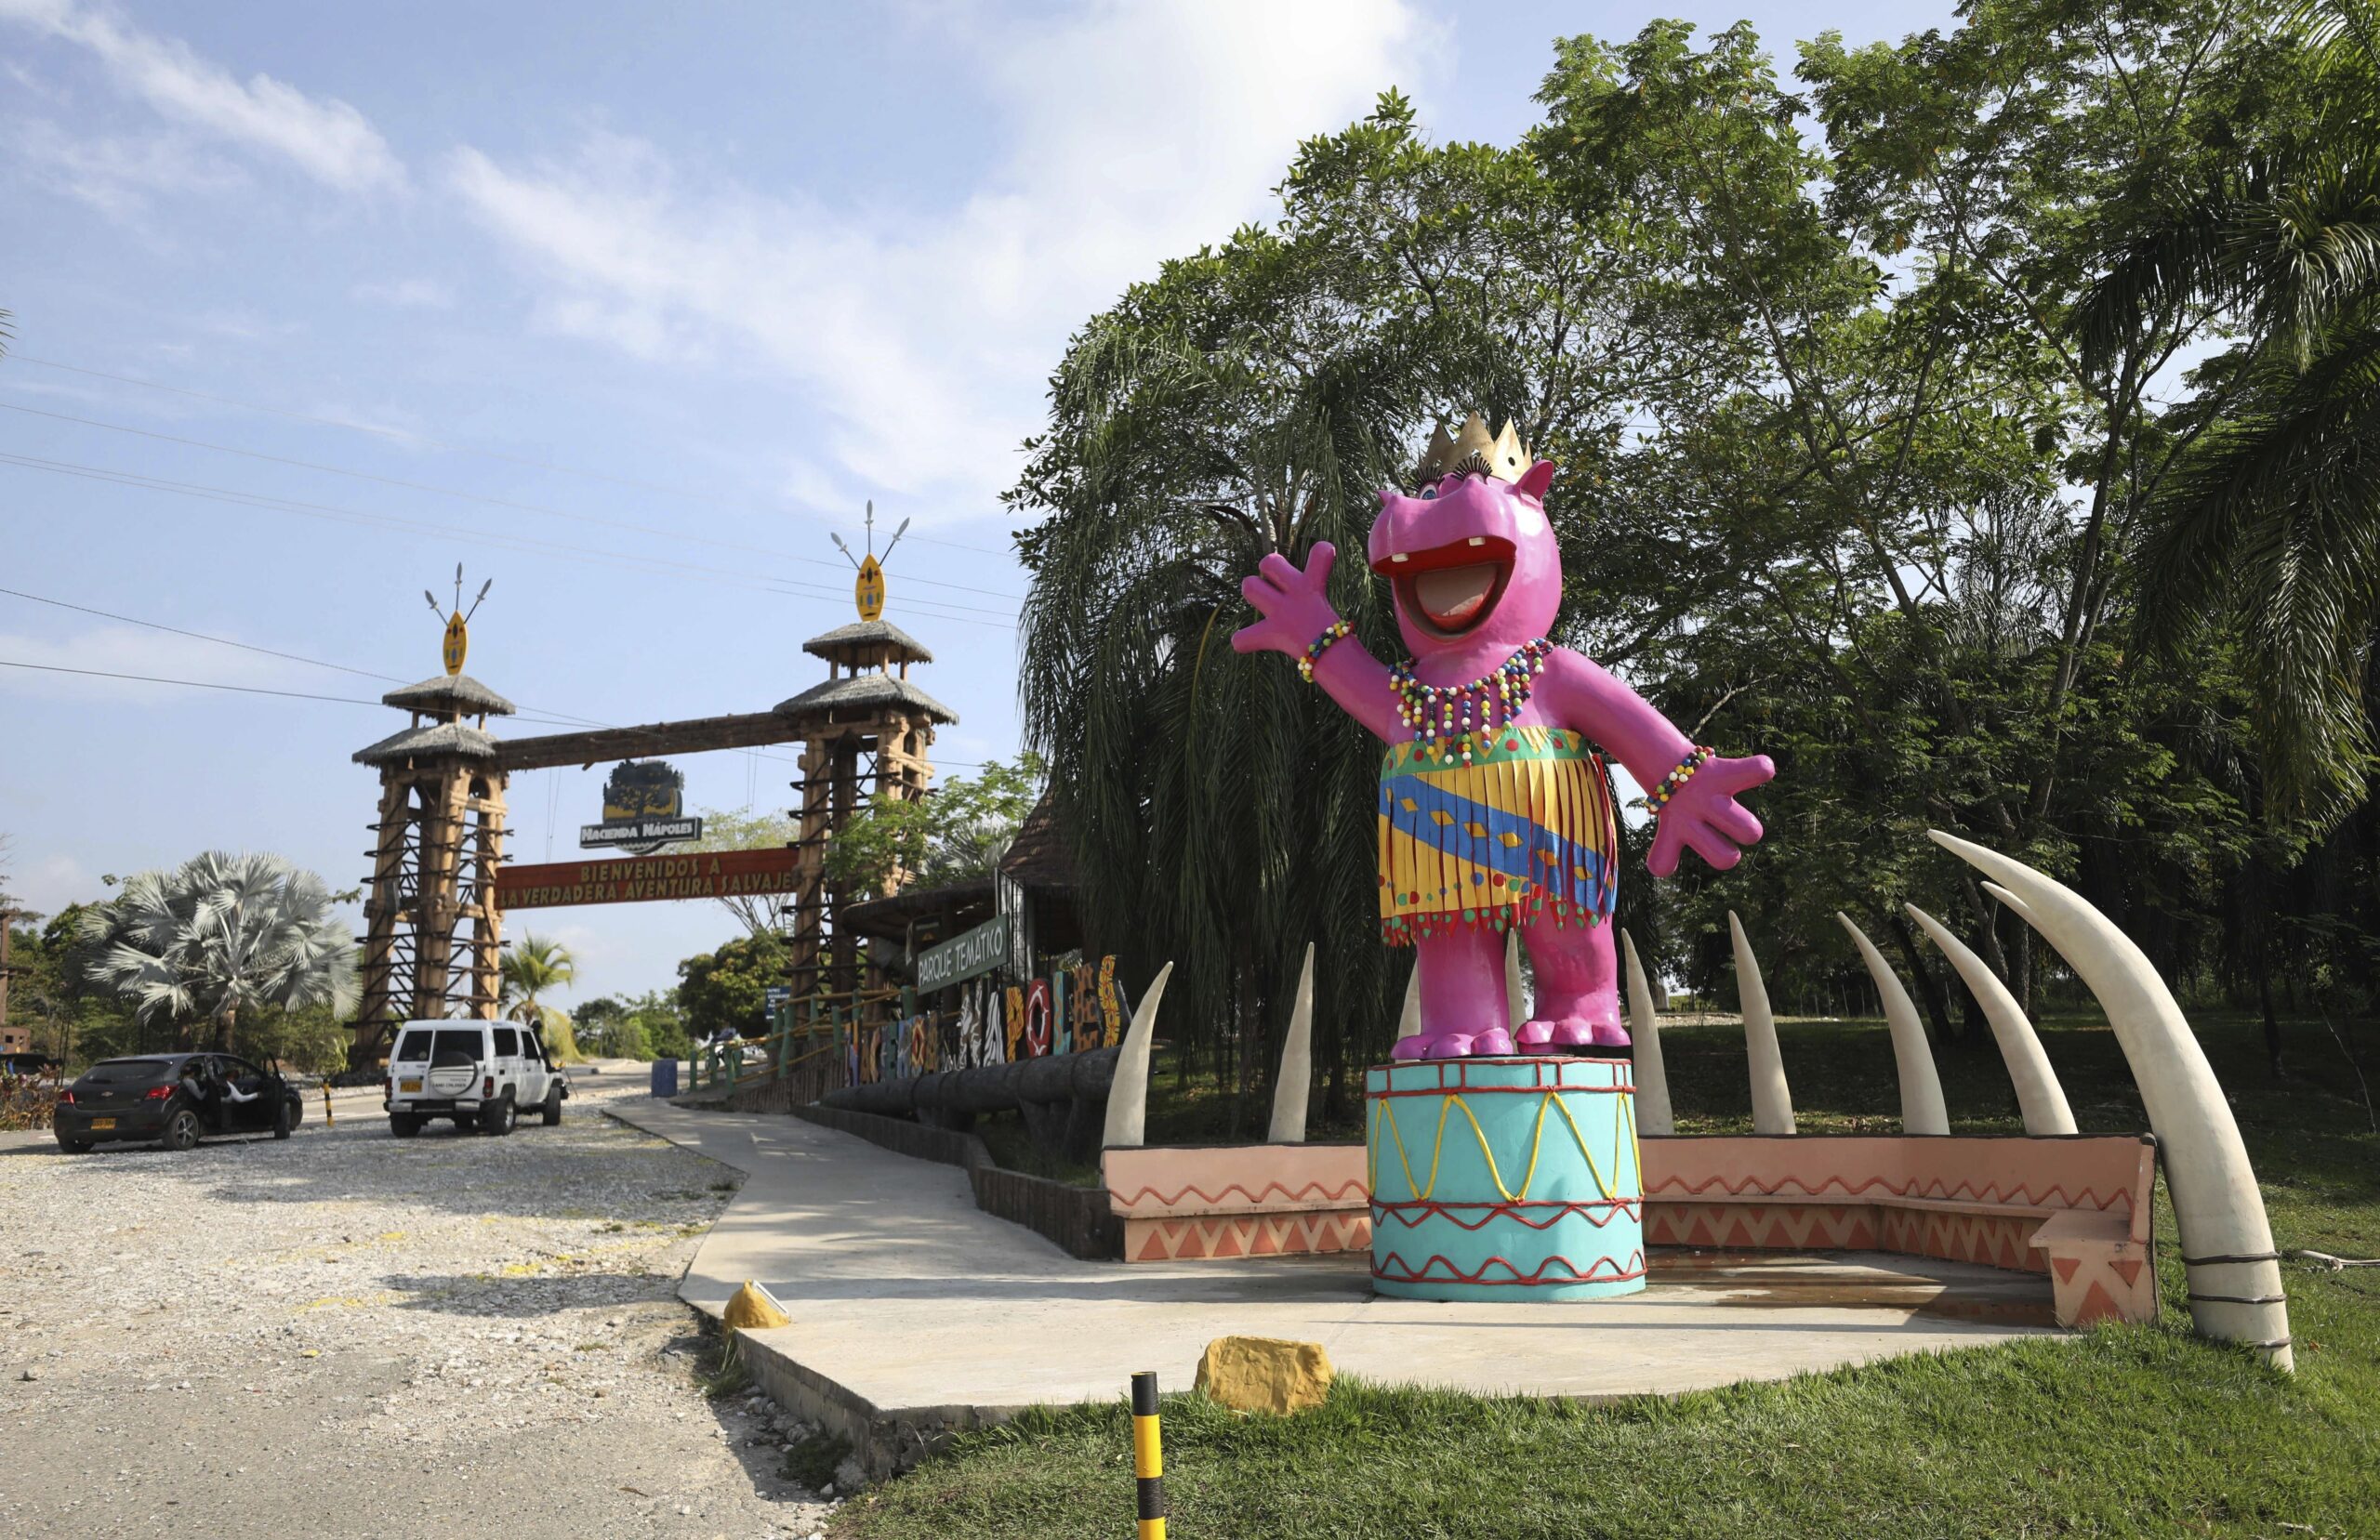 FILE—In this file photo from Feb. 4, 2021, a pink statue of a hippo greets tourists at Hacienda Napoles Park in Puerto Triunfo, Colombia. Hacienda Napoles was once a private zoo with illegally imported animals that belonged to drug trafficker Pablo Escobar. A U.S. court order says the offspring of hippos once owned by Escobar can be recognized as people with legal rights in the U.S. The case involves a lawsuit against the Colombian government over whether to kill or sterilize the hippos whose numbers are growing at a fast pace. (AP Photo/Fernando Vergara, File)